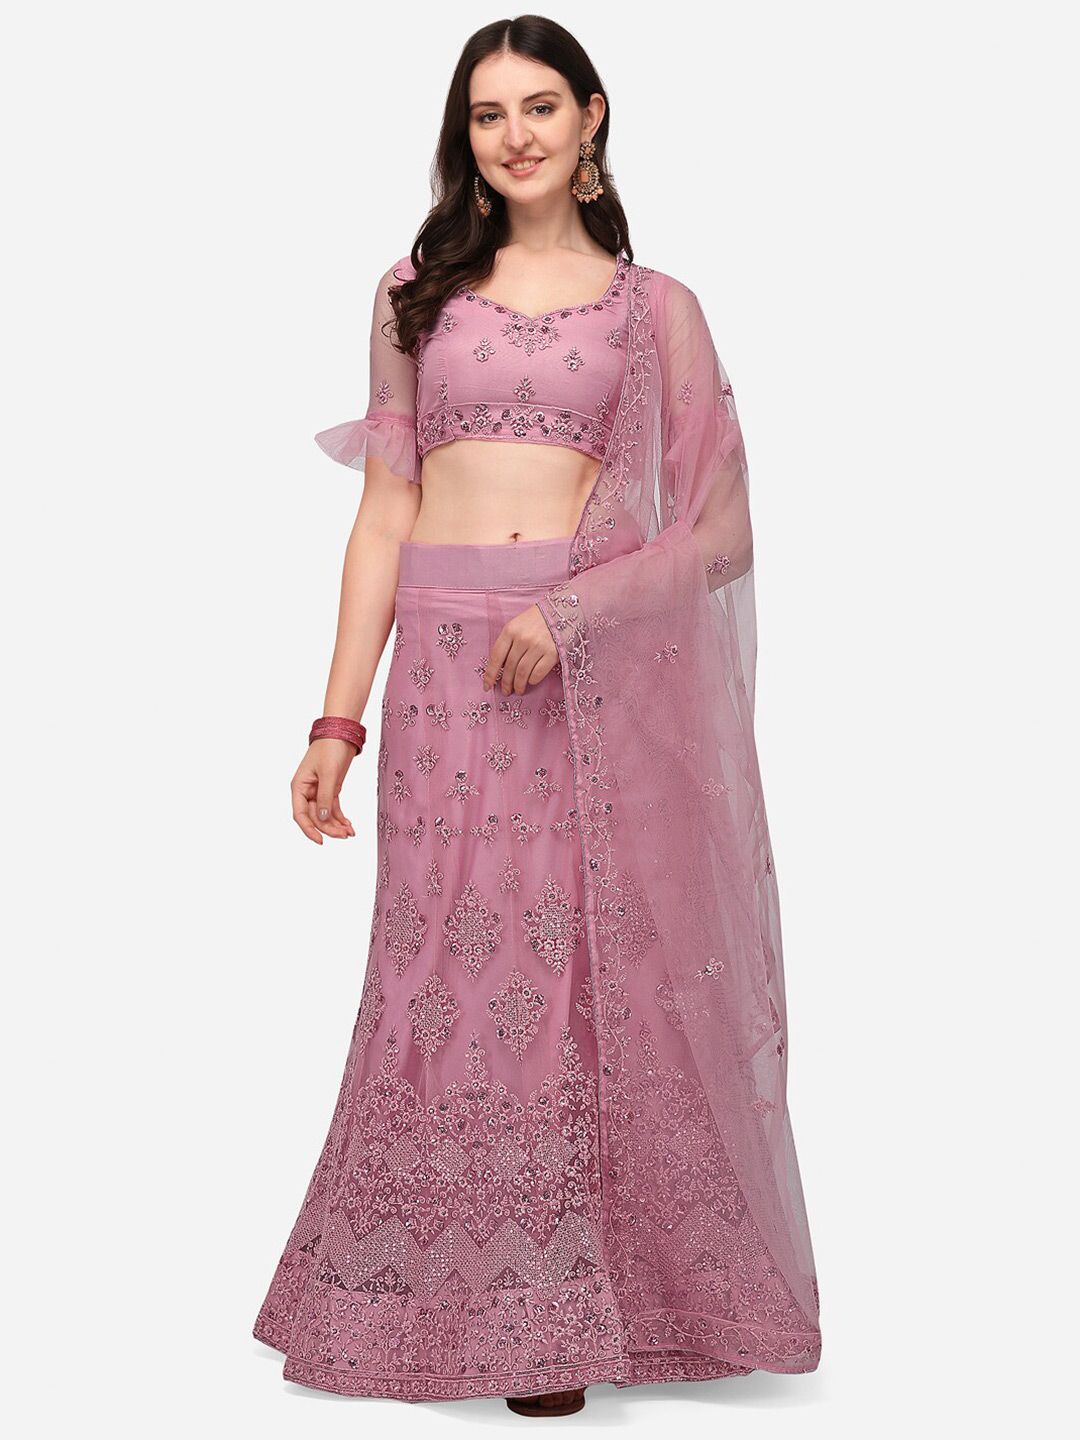 RAJGRANTH Pink Embroidered Semi-Stitched Lehenga & Unstitched Blouse With Dupatta Price in India